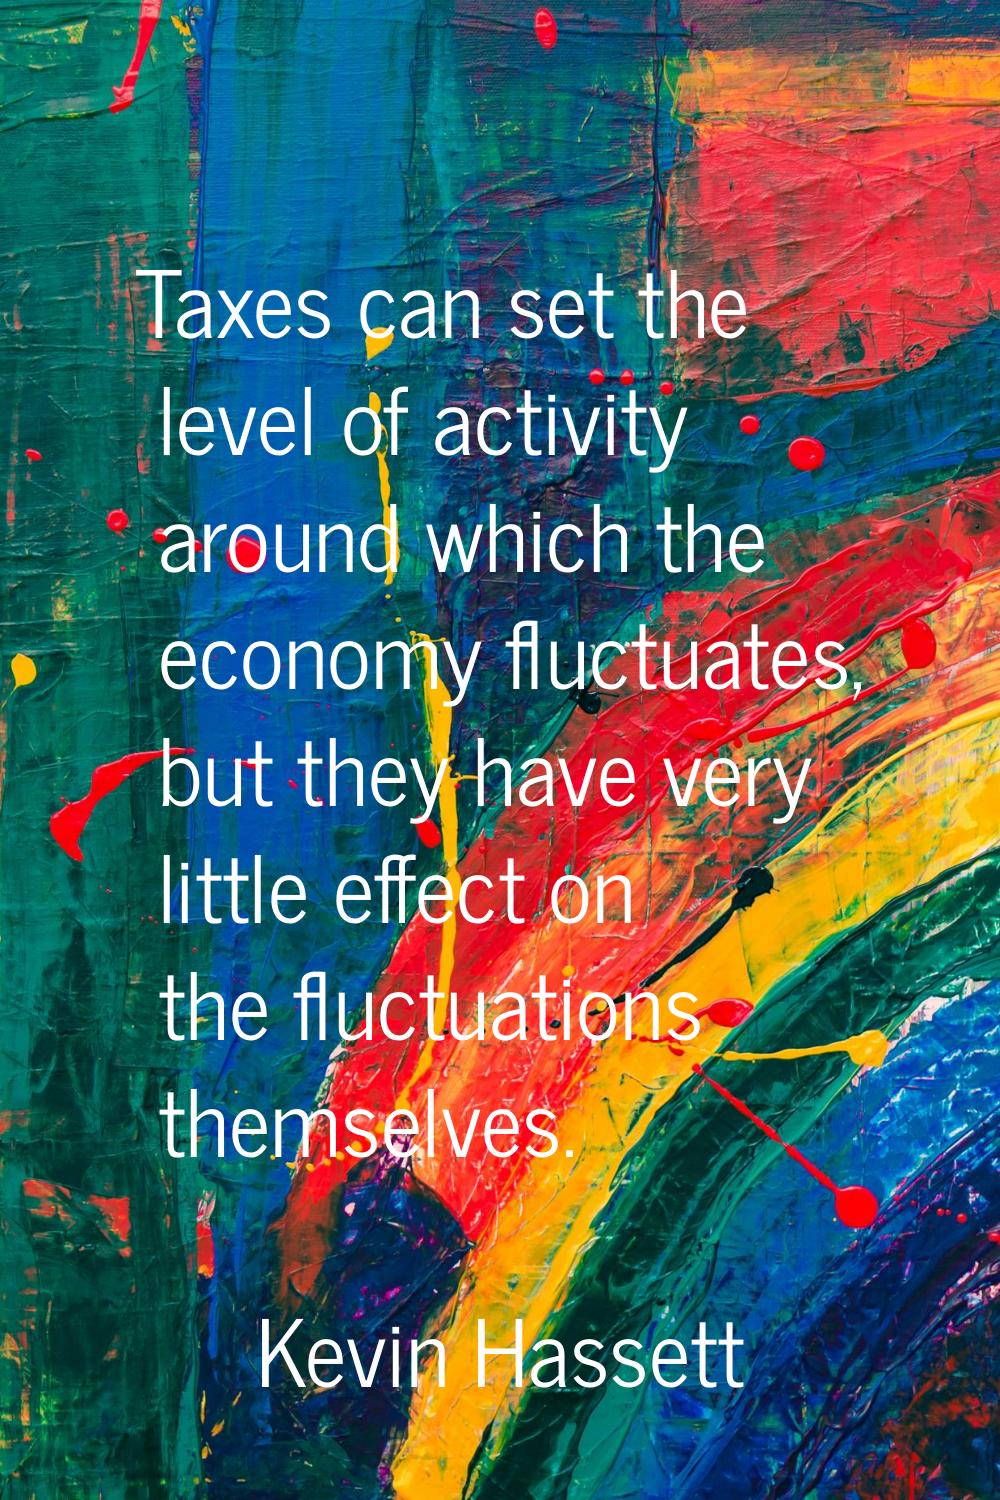 Taxes can set the level of activity around which the economy fluctuates, but they have very little 